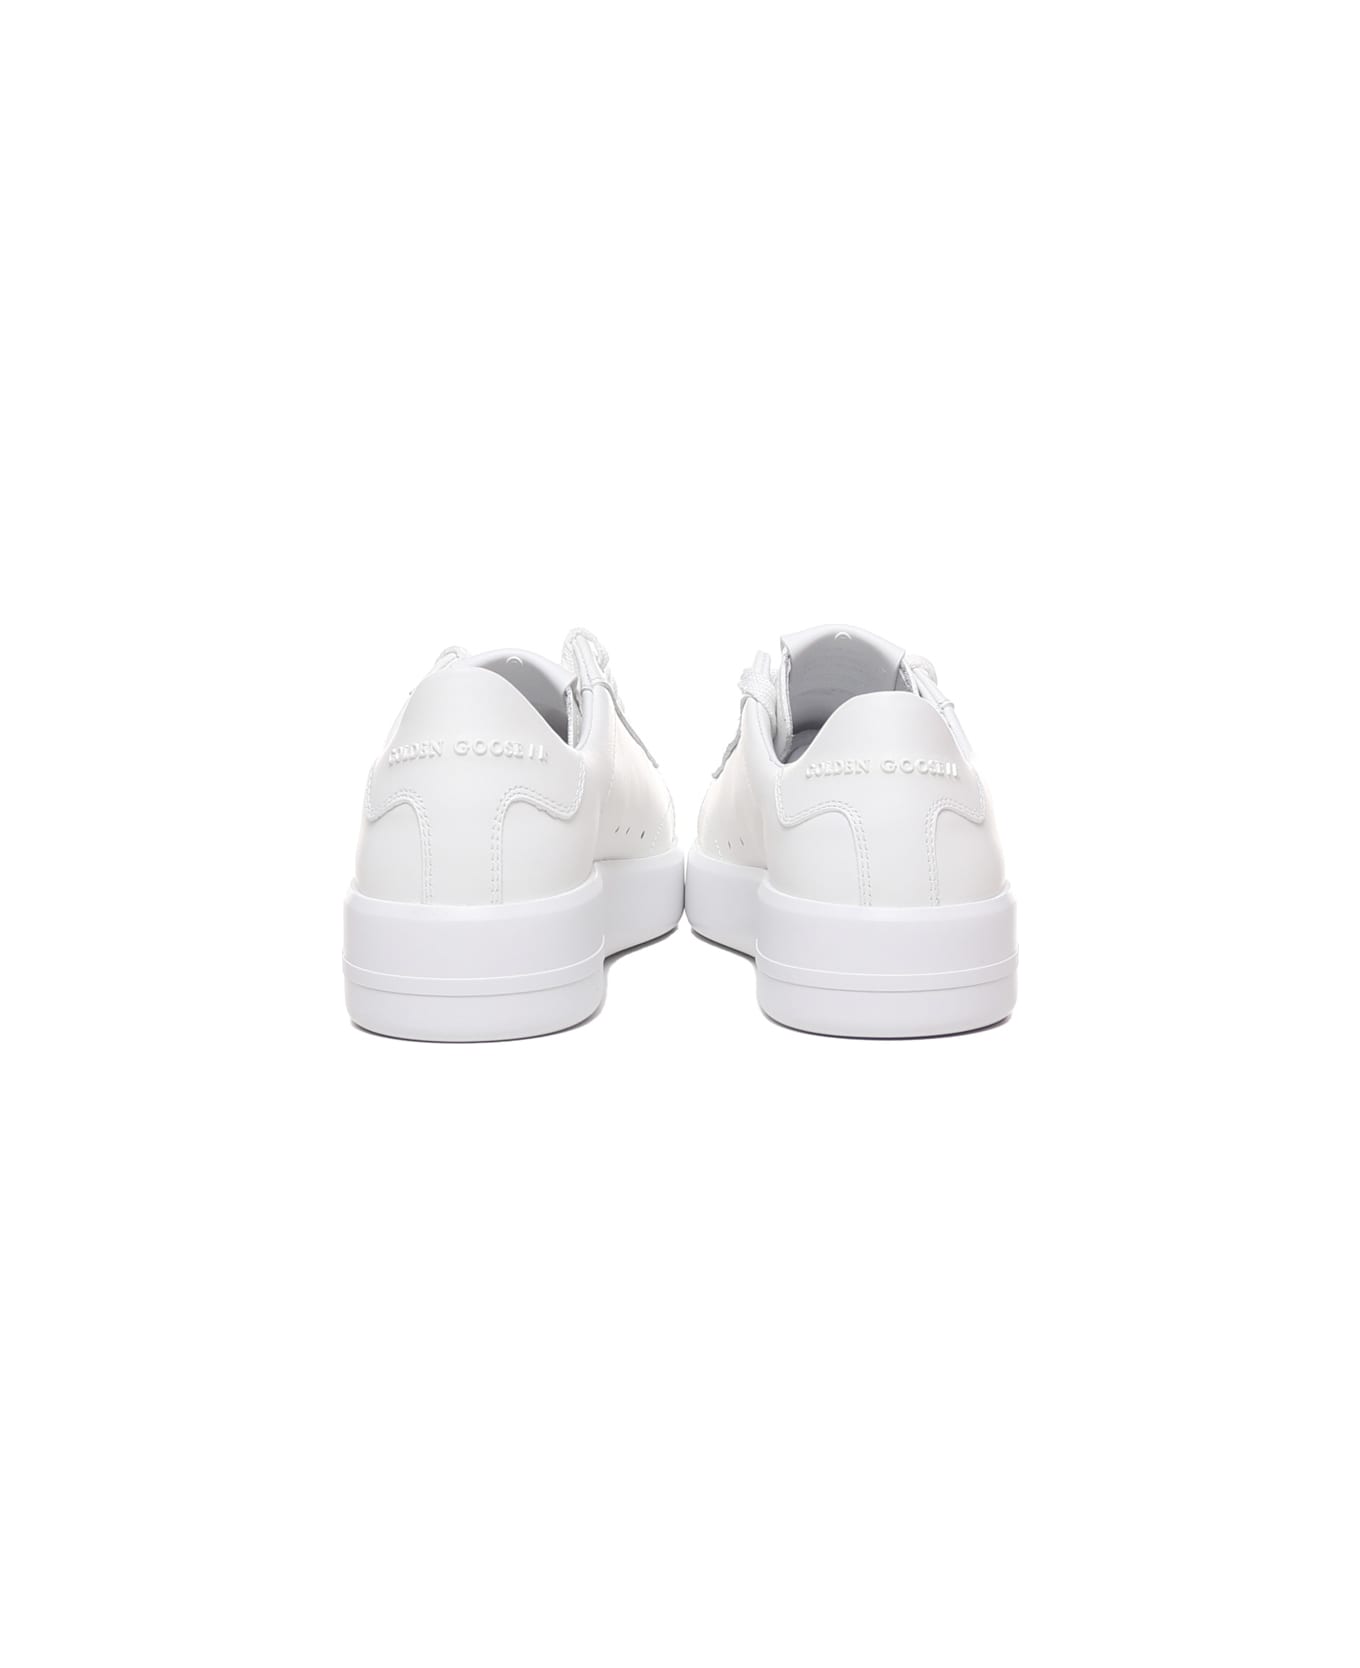 Golden Goose Pure New Sneakers In Leather With Contrasting Heel Tab - White